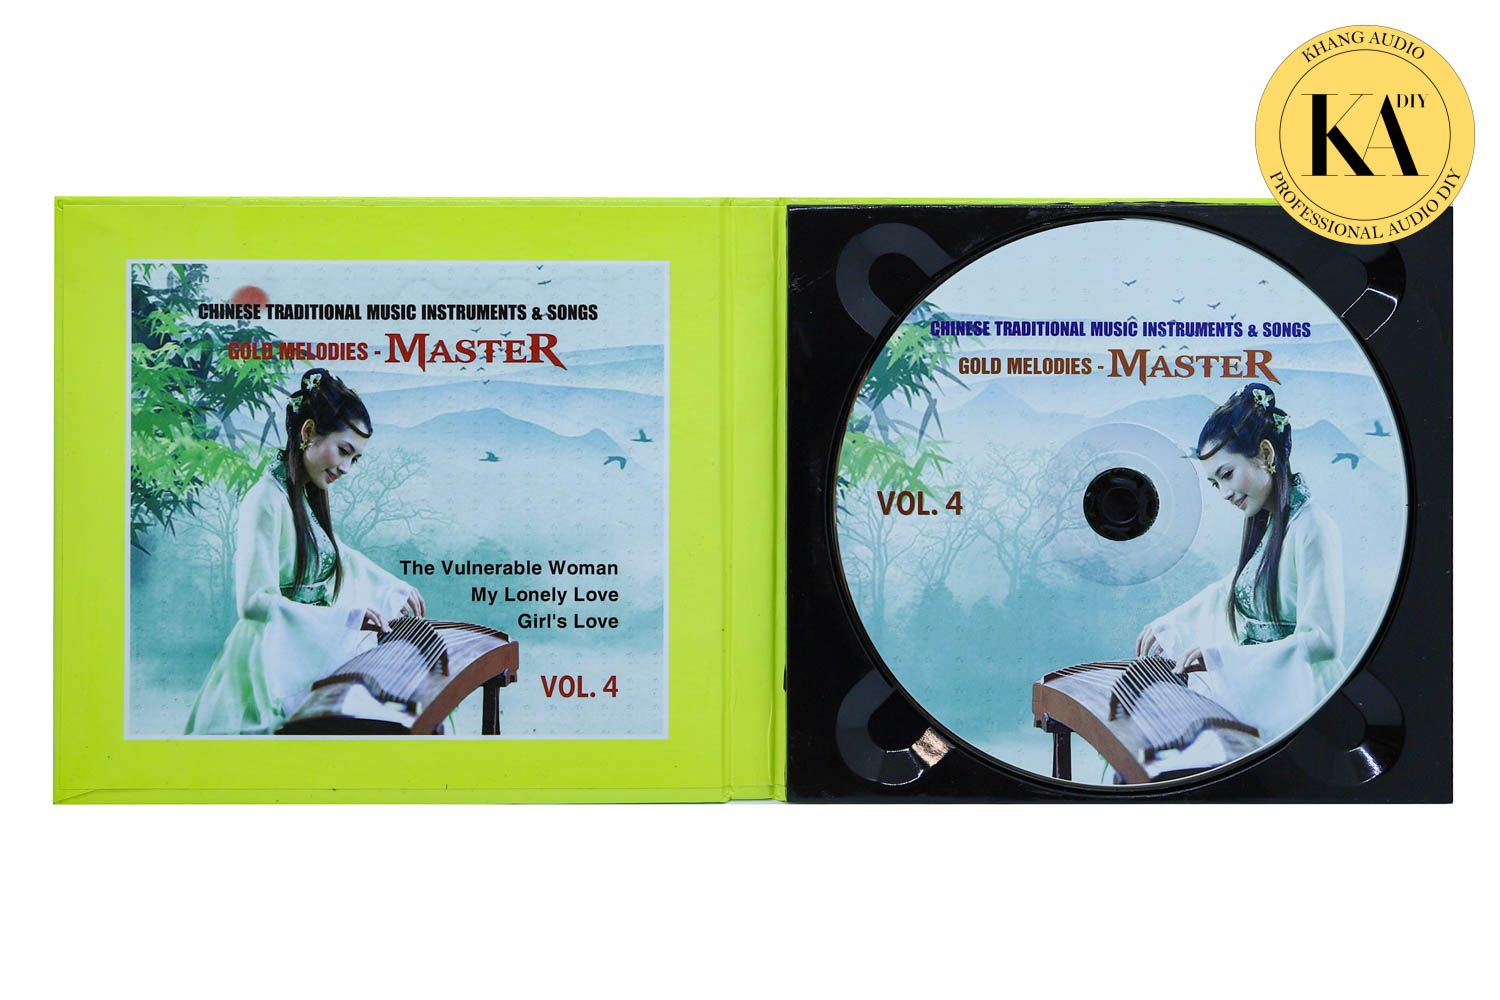 Gold Melodies - Master Vol.4